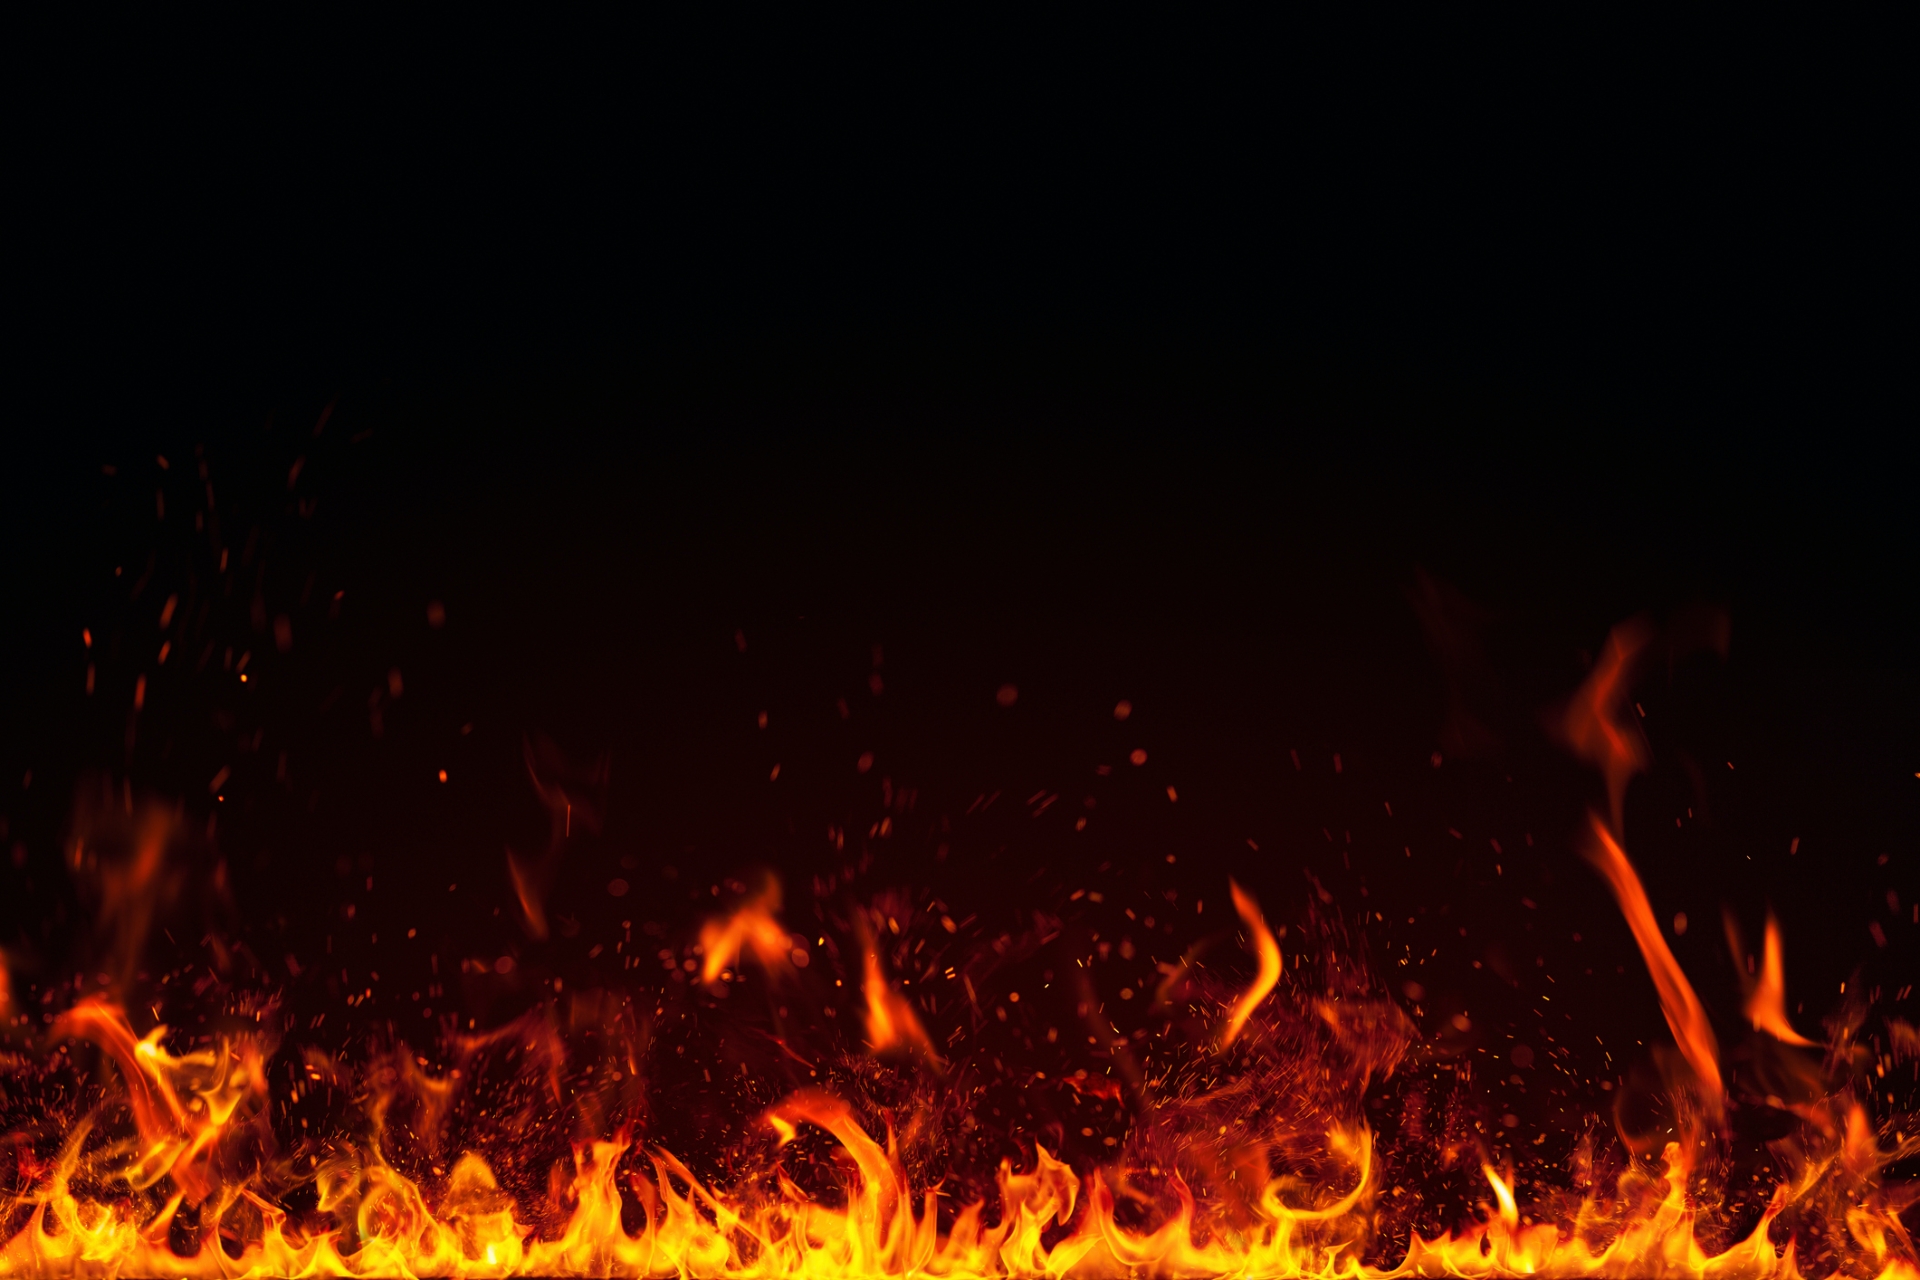 Fire and flames background - John Soules Hot Ones